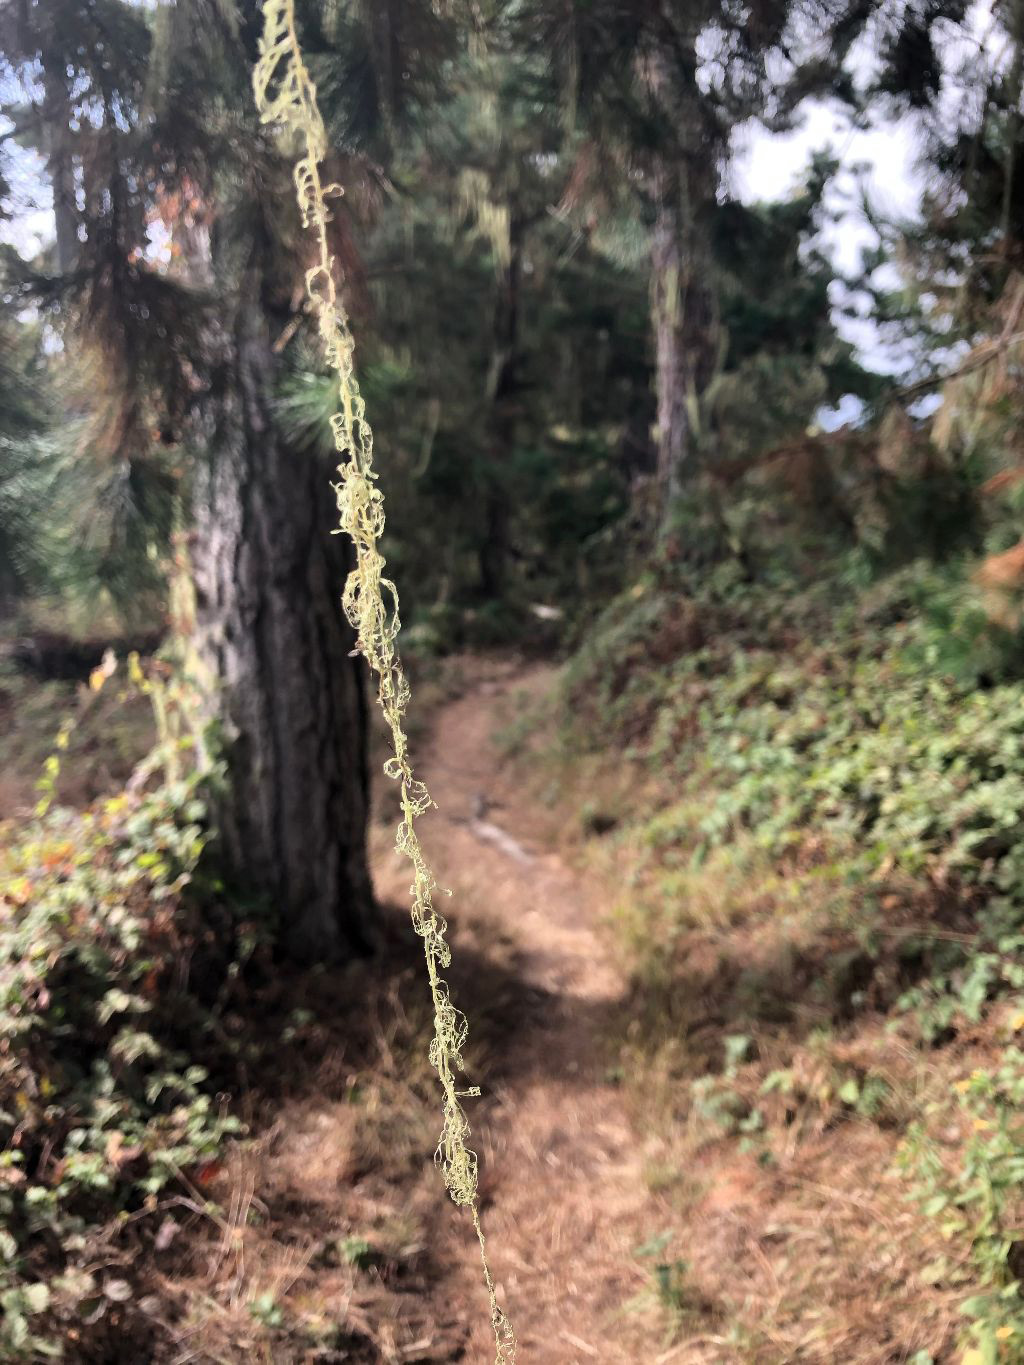 Photo of Point Lobos State Natural Reserve, lace lichen strands on Whalers Knoll trail. Photo credit: Don Koch.